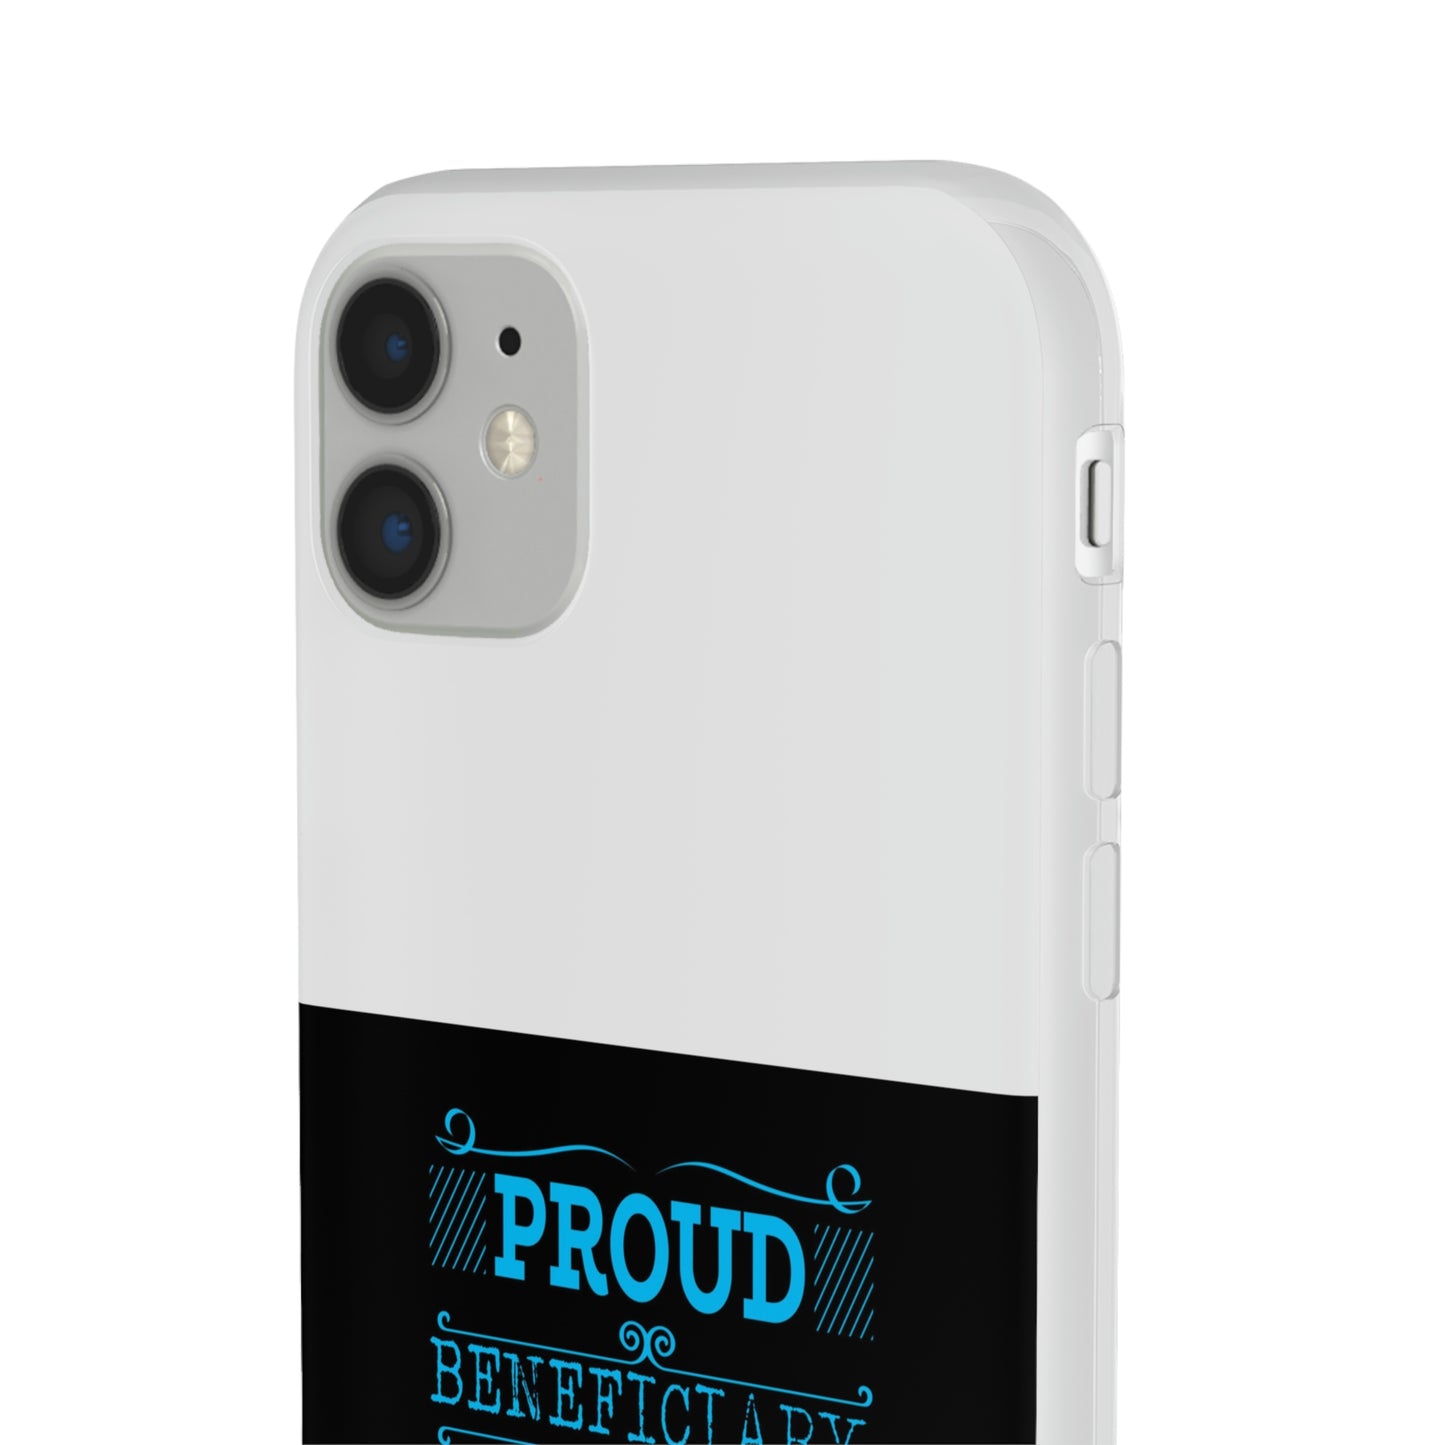 Proud Beneficiary Of God's Legacy Flexi Phone Case